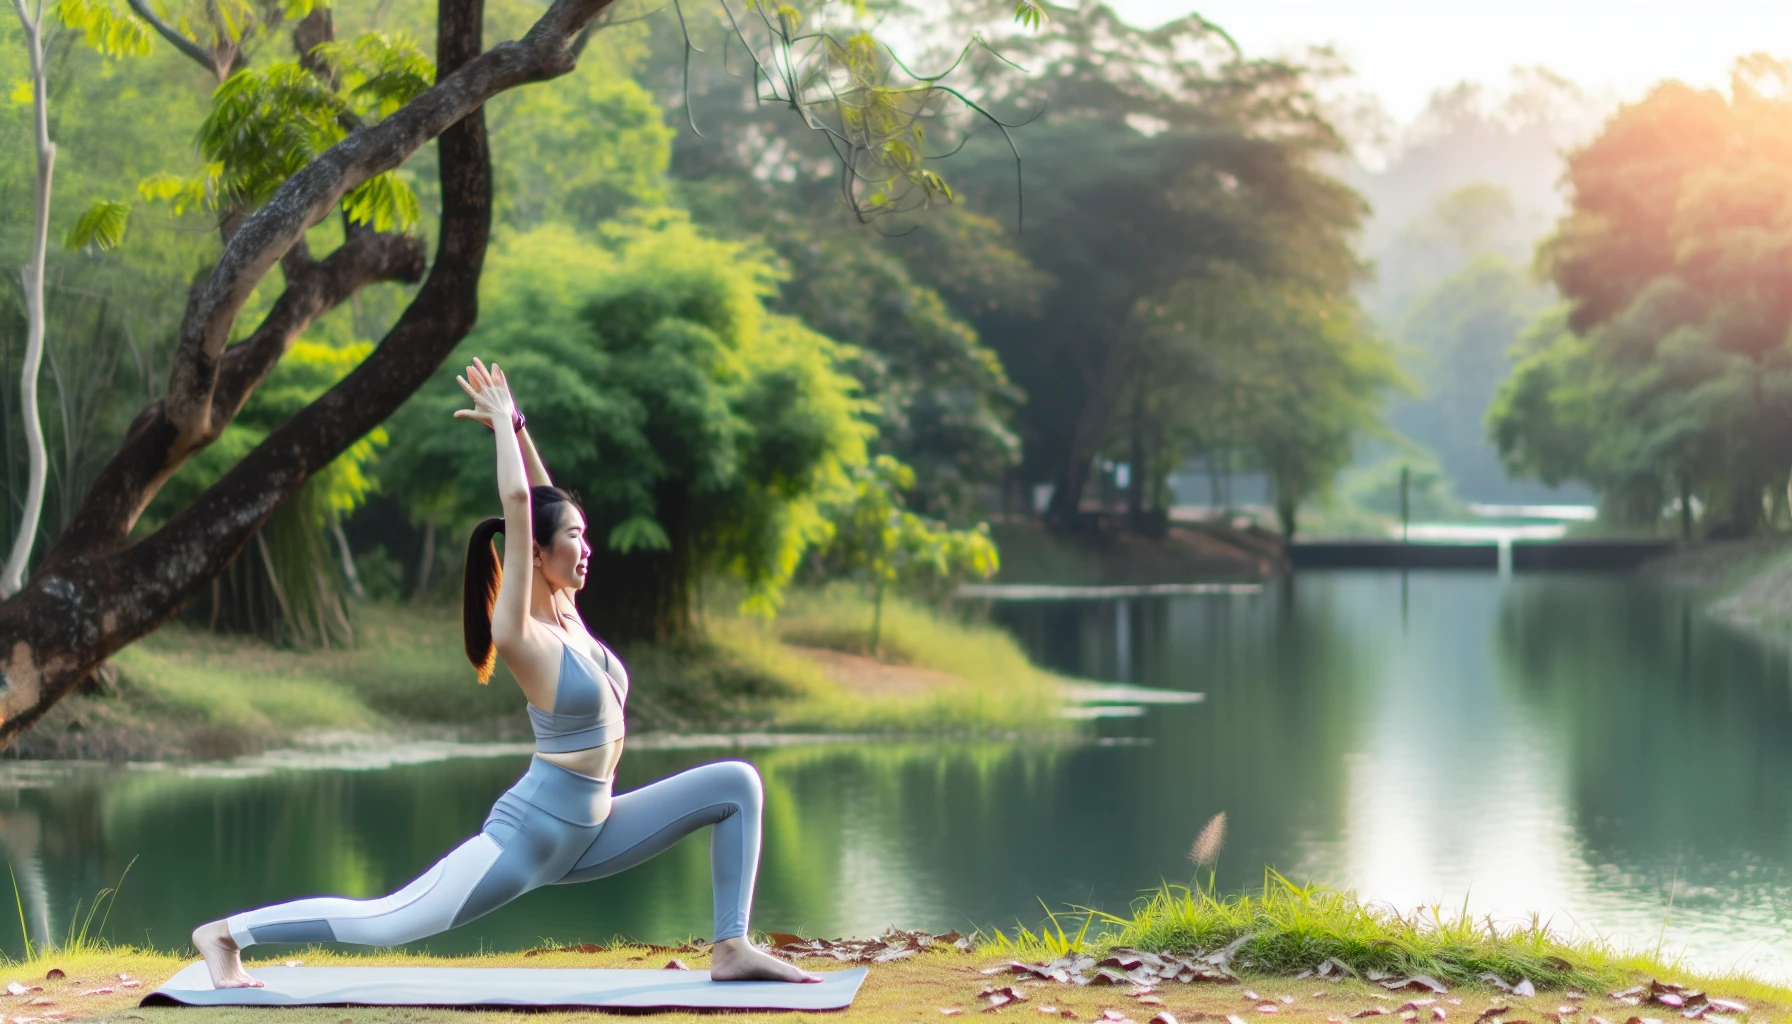 A person practicing yoga in a serene outdoor setting, representing health and wellness benefits in employee packages.